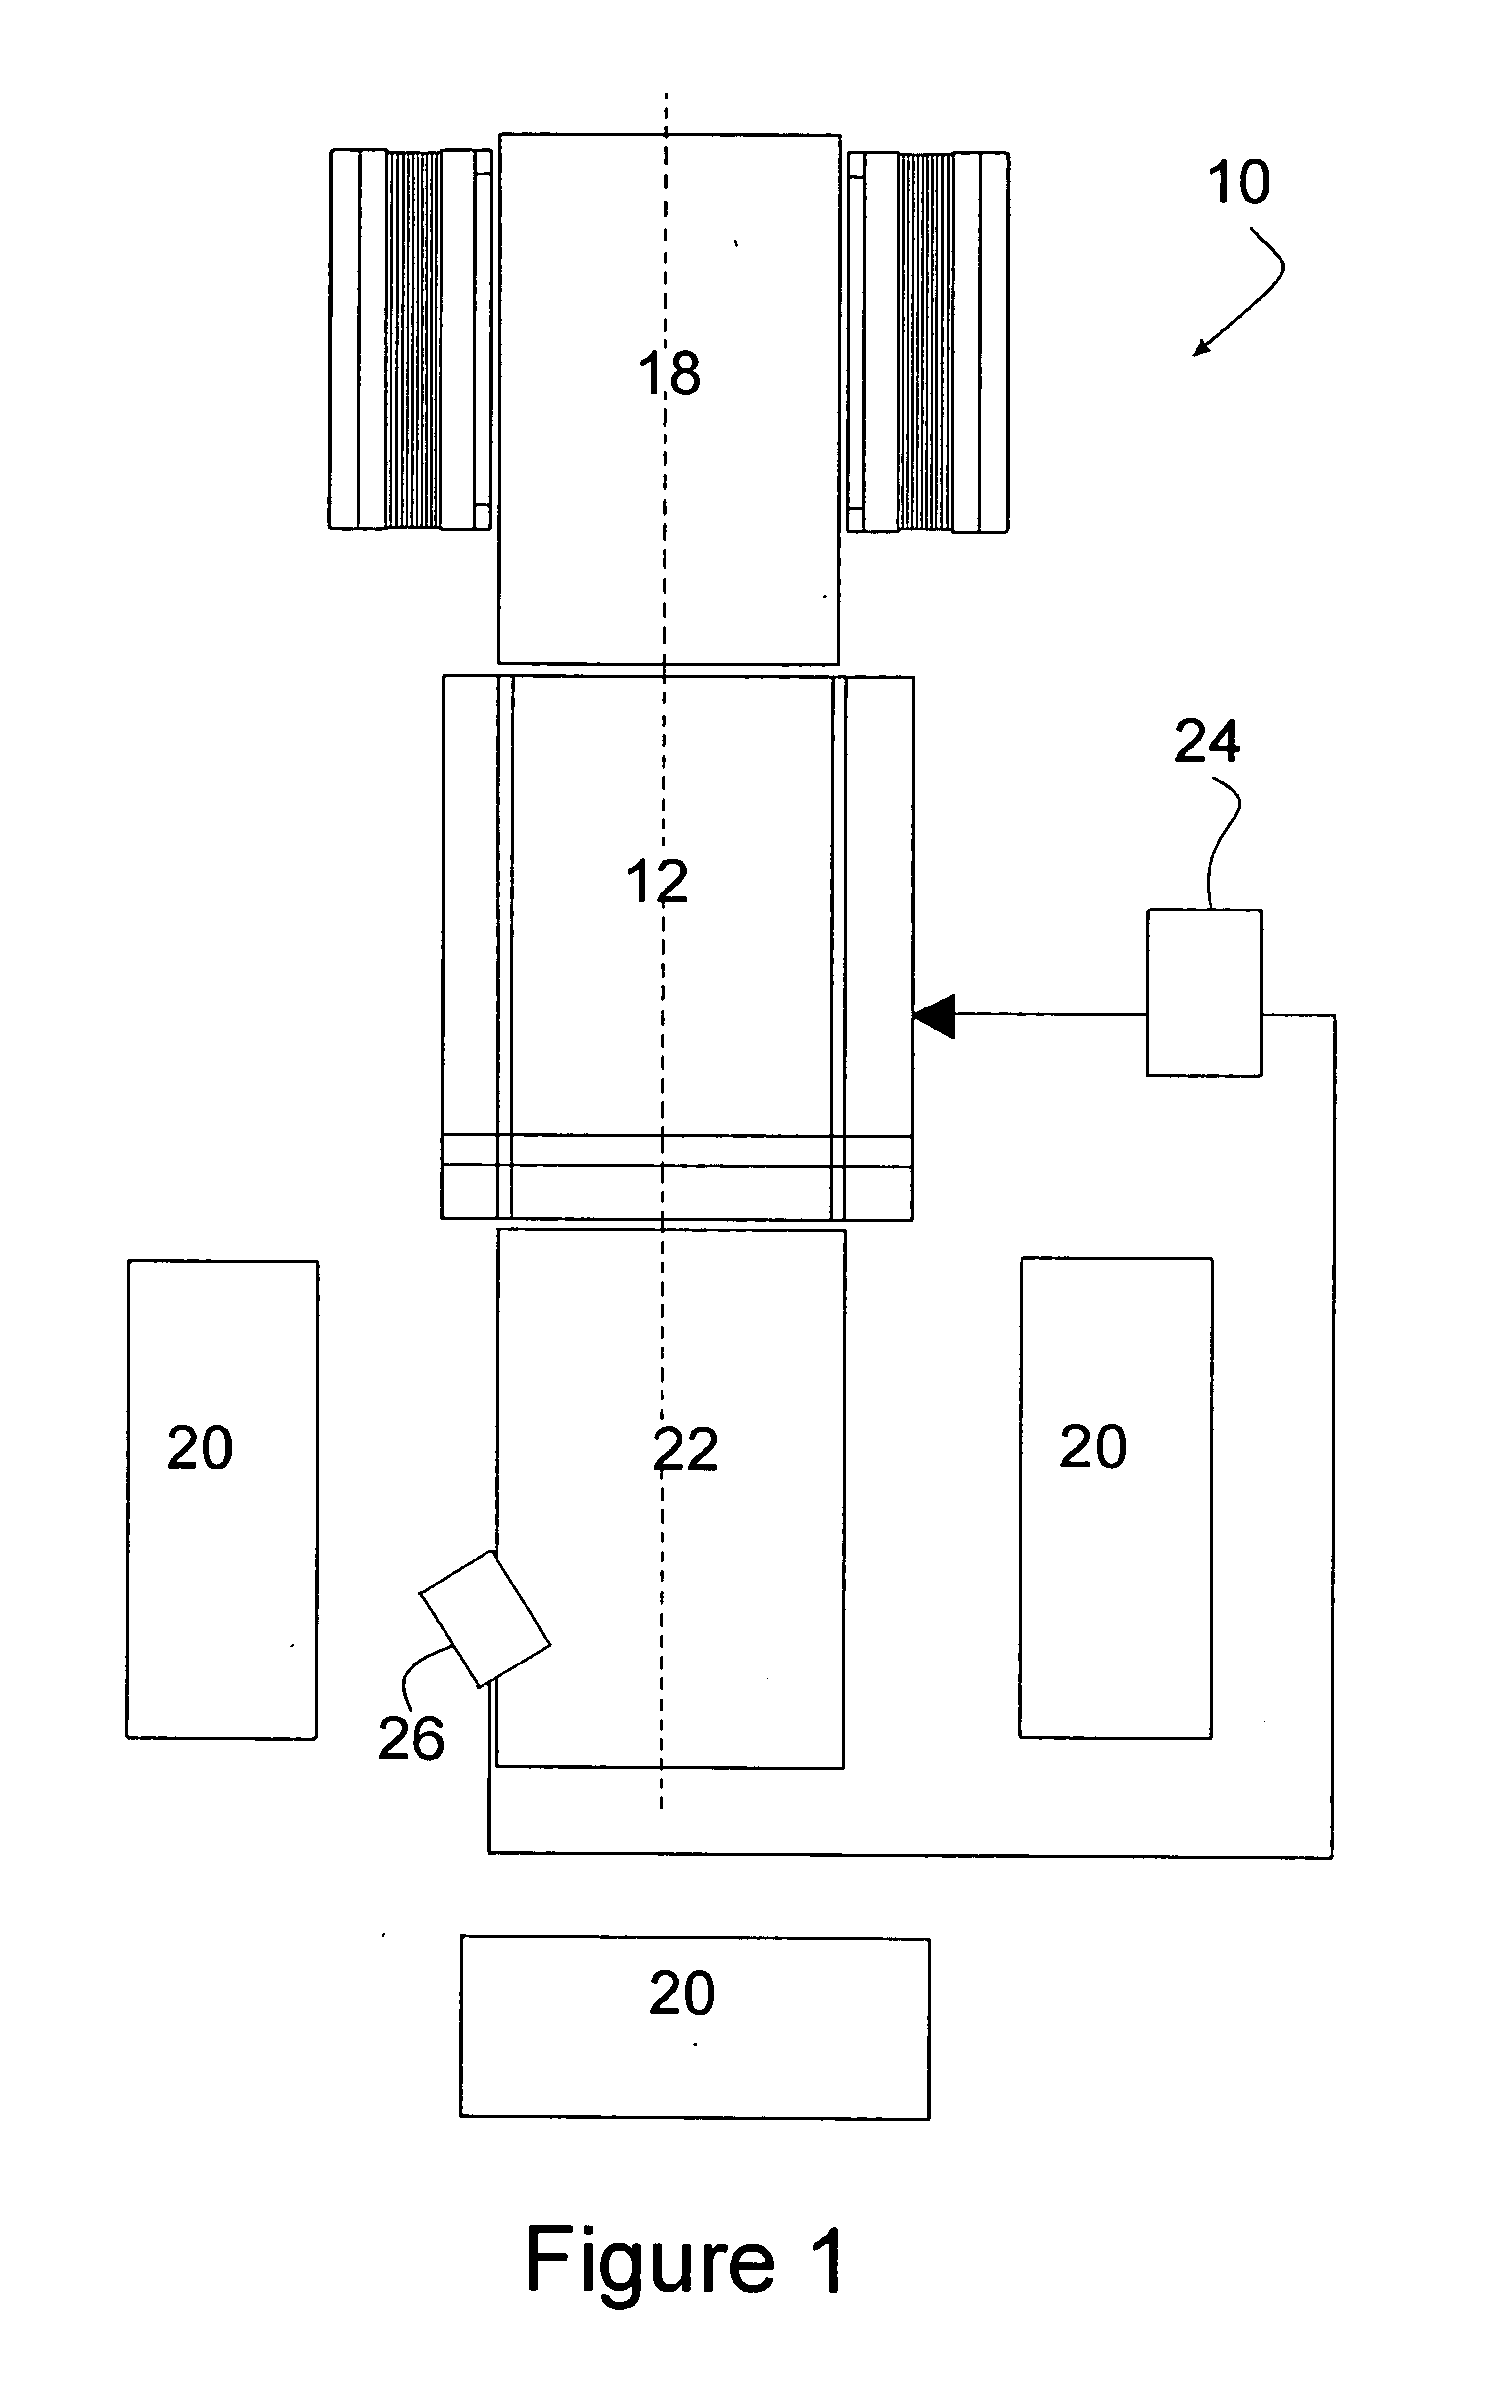 Glass processing equipment with dynamic continuous production control system